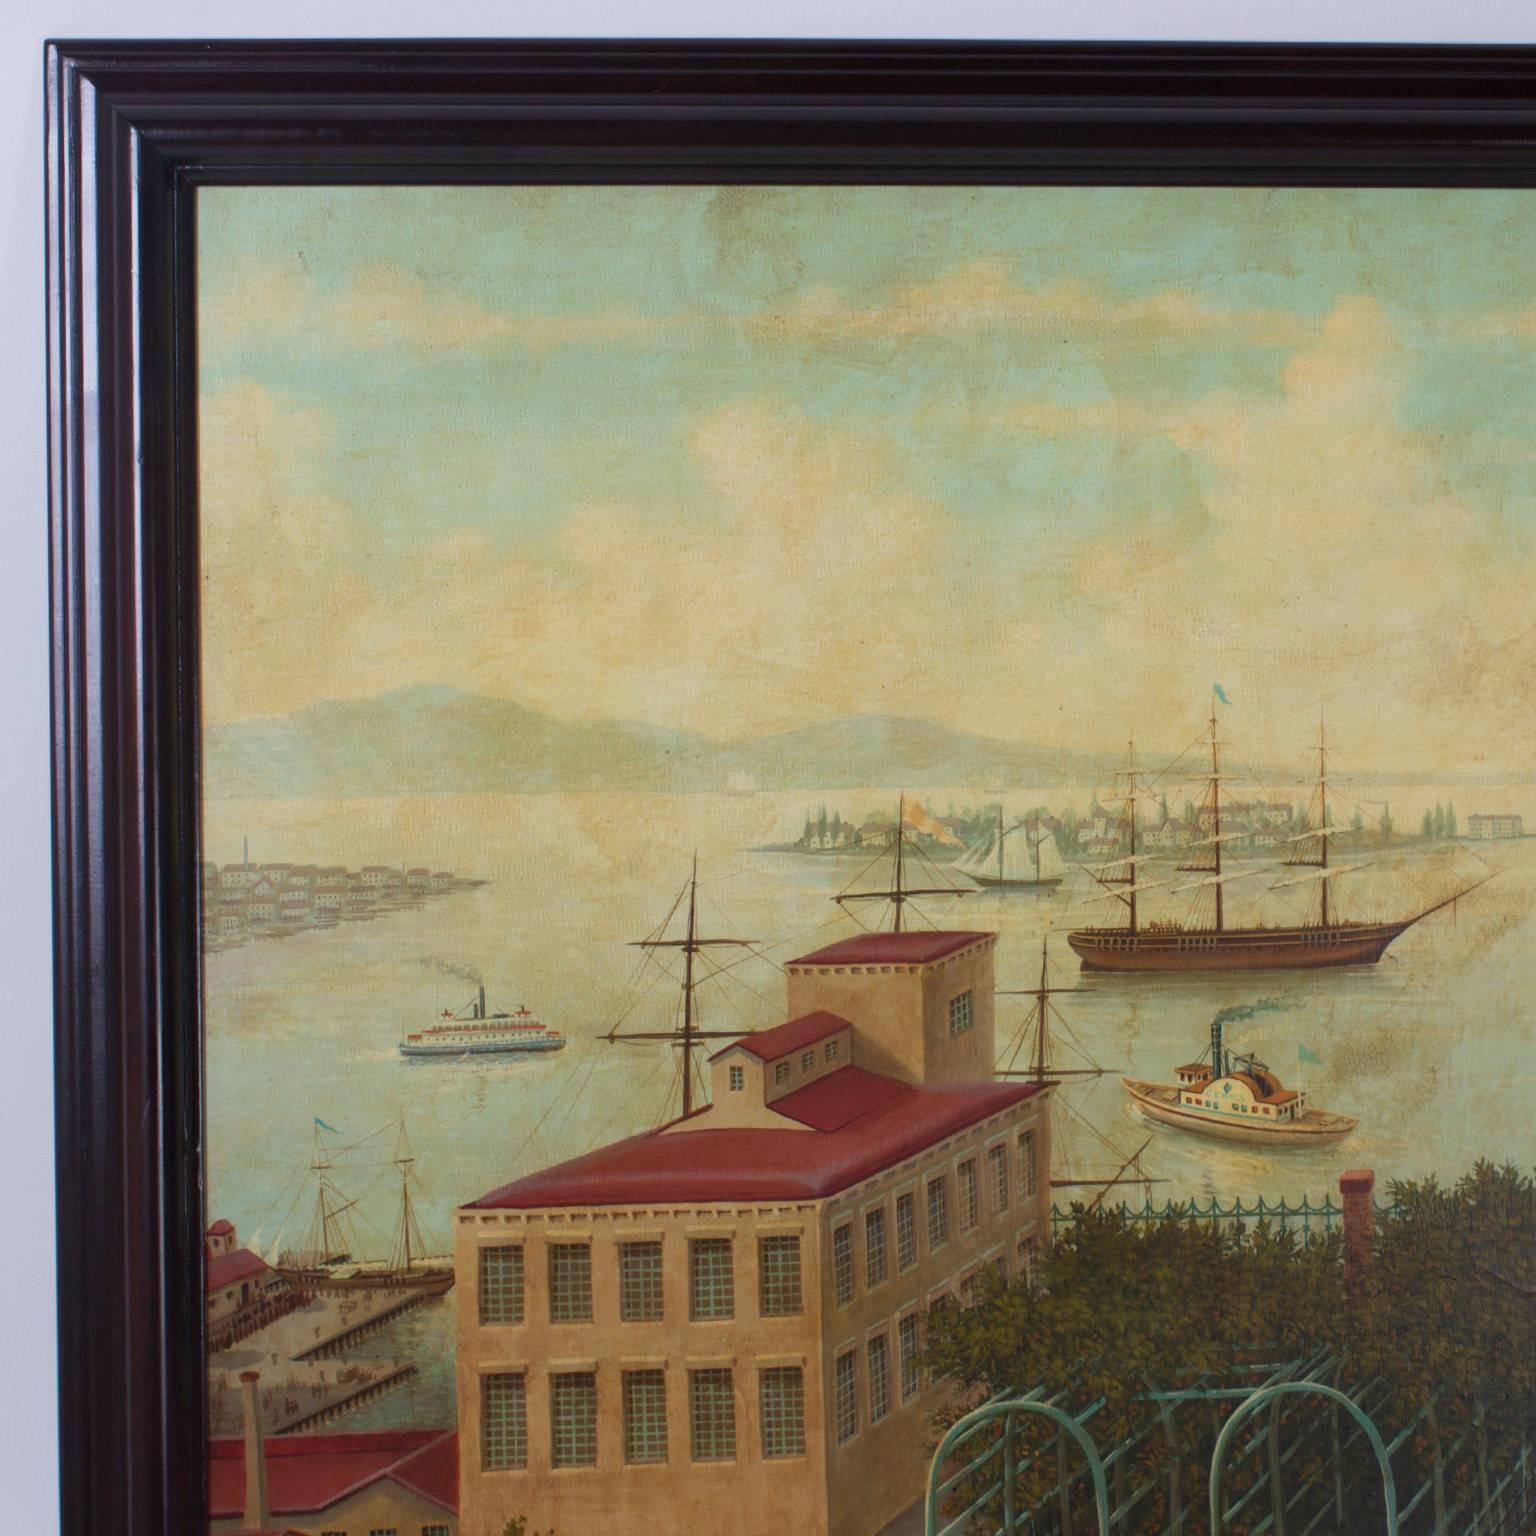 Large-scale oil painting on canvas depicting a panoramic scene of a 19th century harbor and adjacent civilization. Featuring an ambitious attention to detail and a breathtaking view of a moment in time. This painting has a contrived patina to create